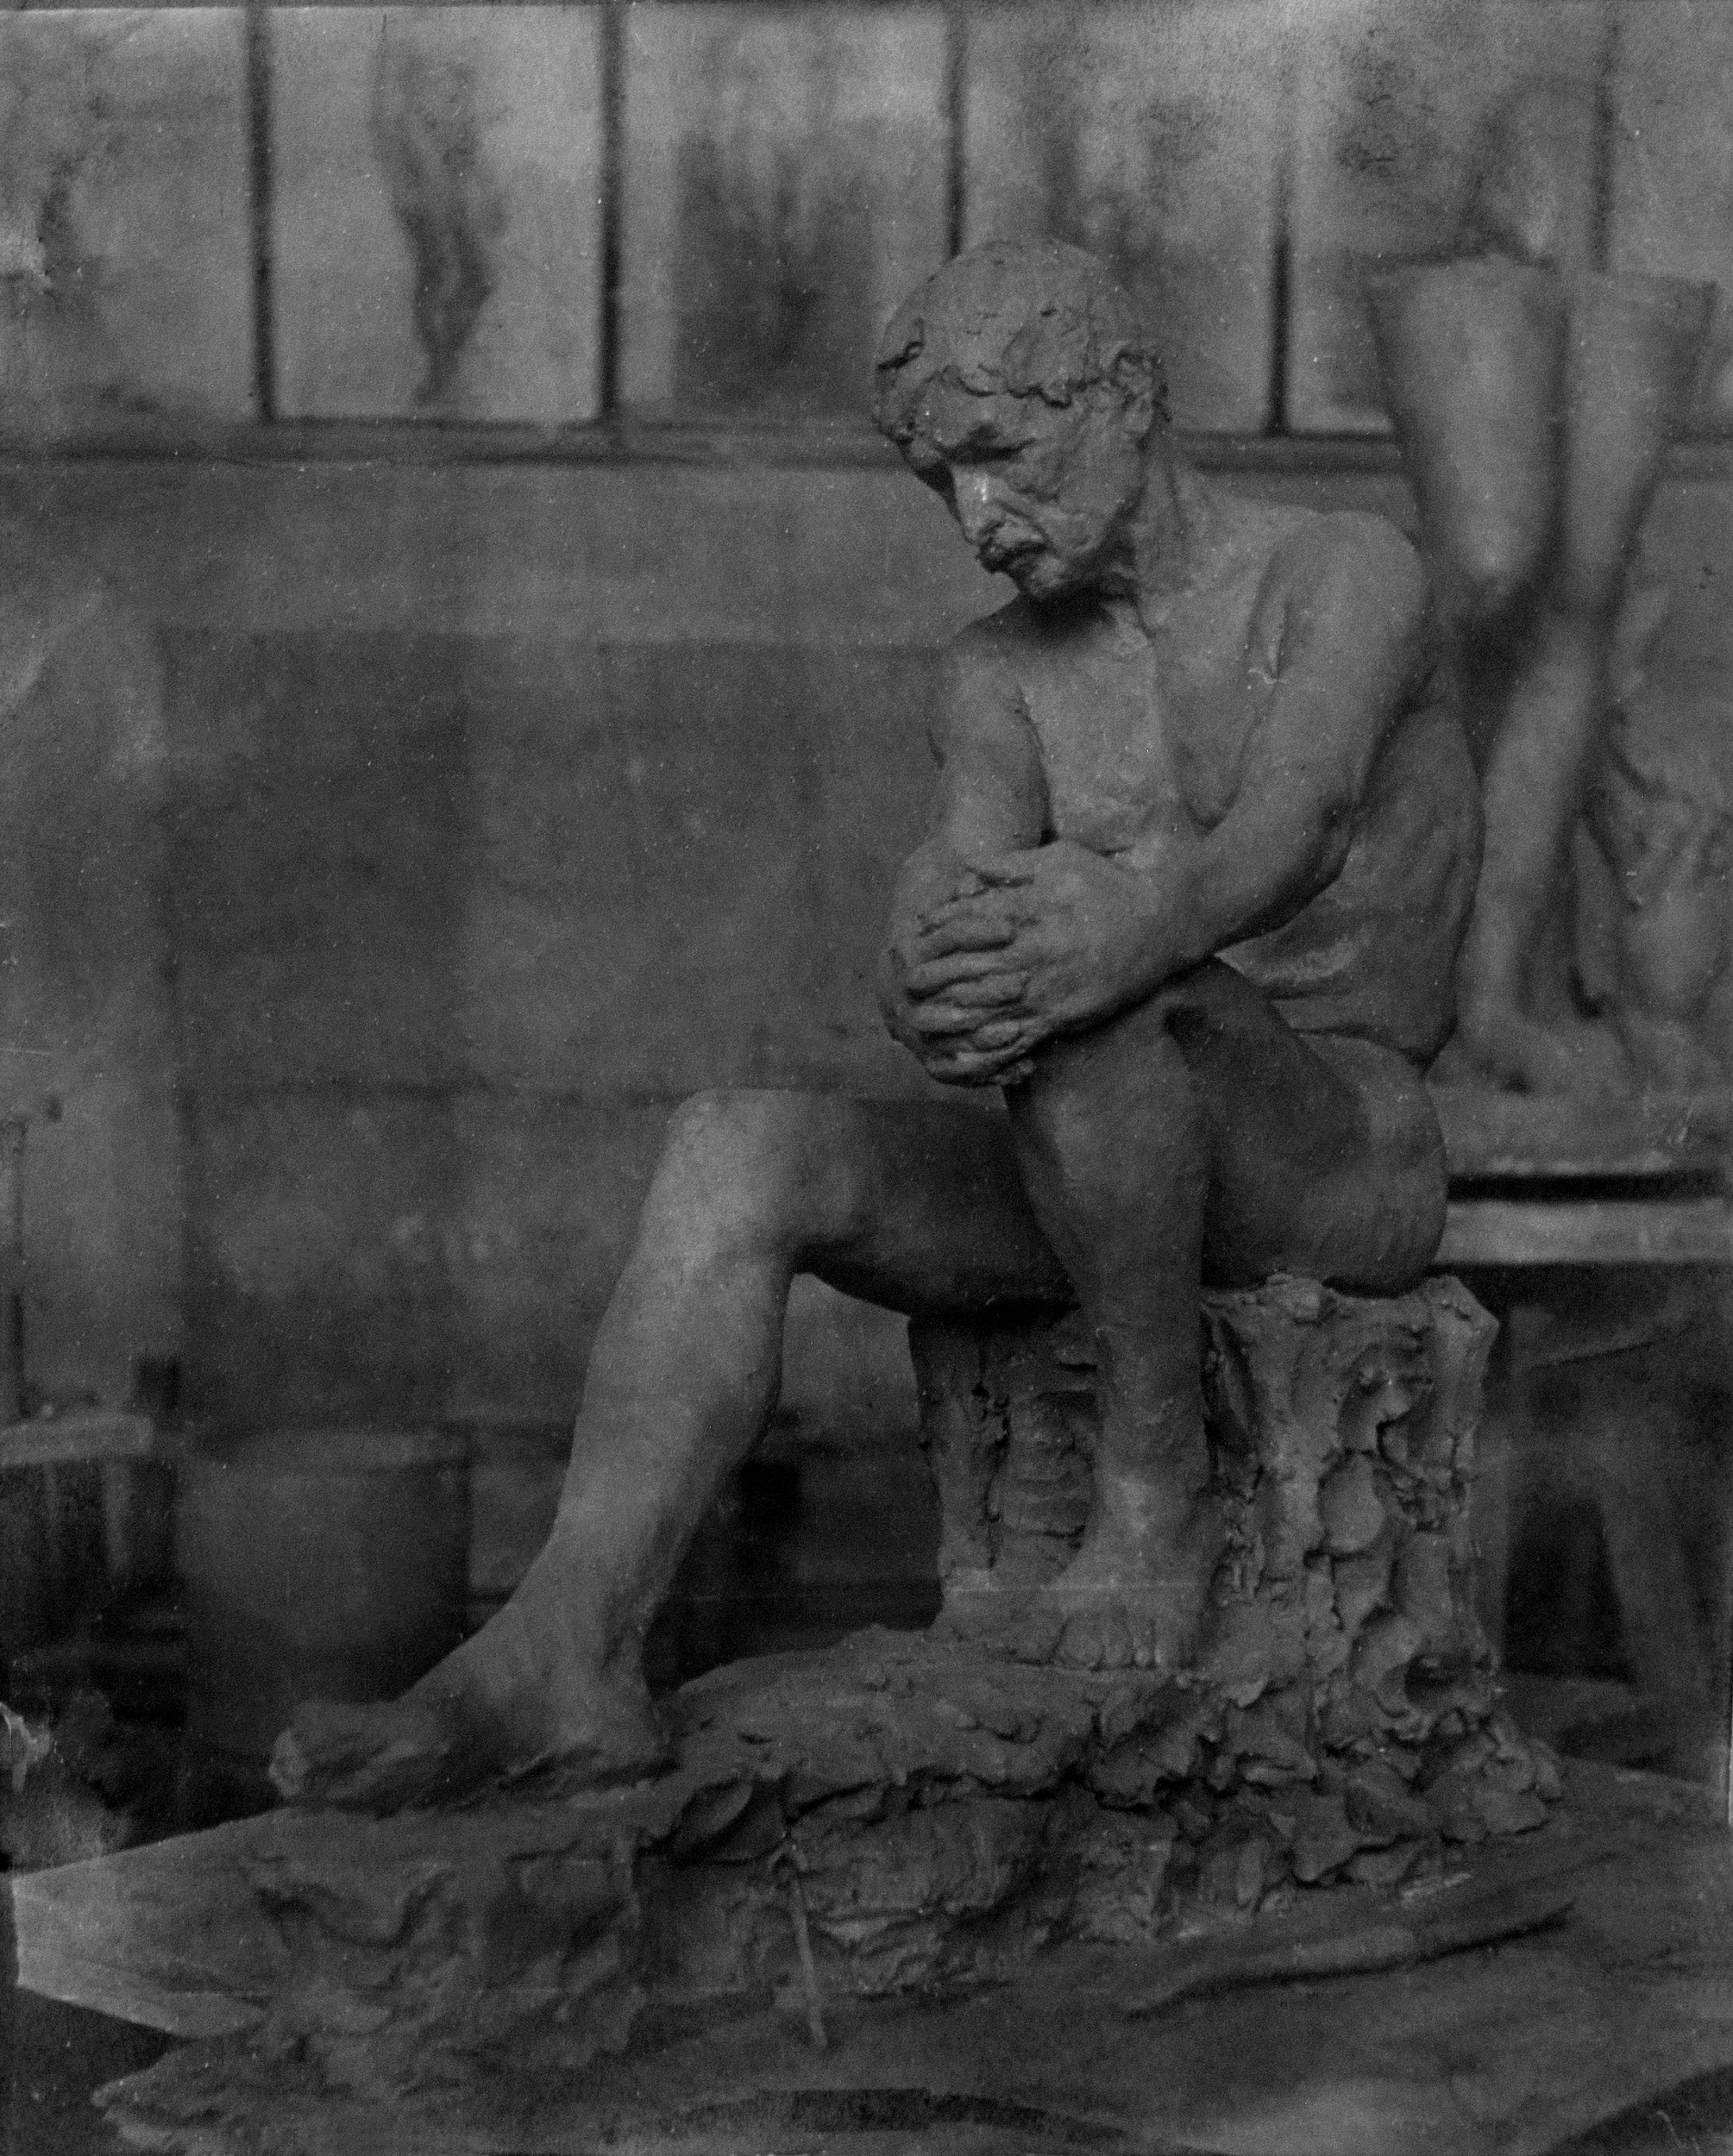 Historical black-and-white photograph of a sculpture in the form of a seated man, hands clasped over one knee